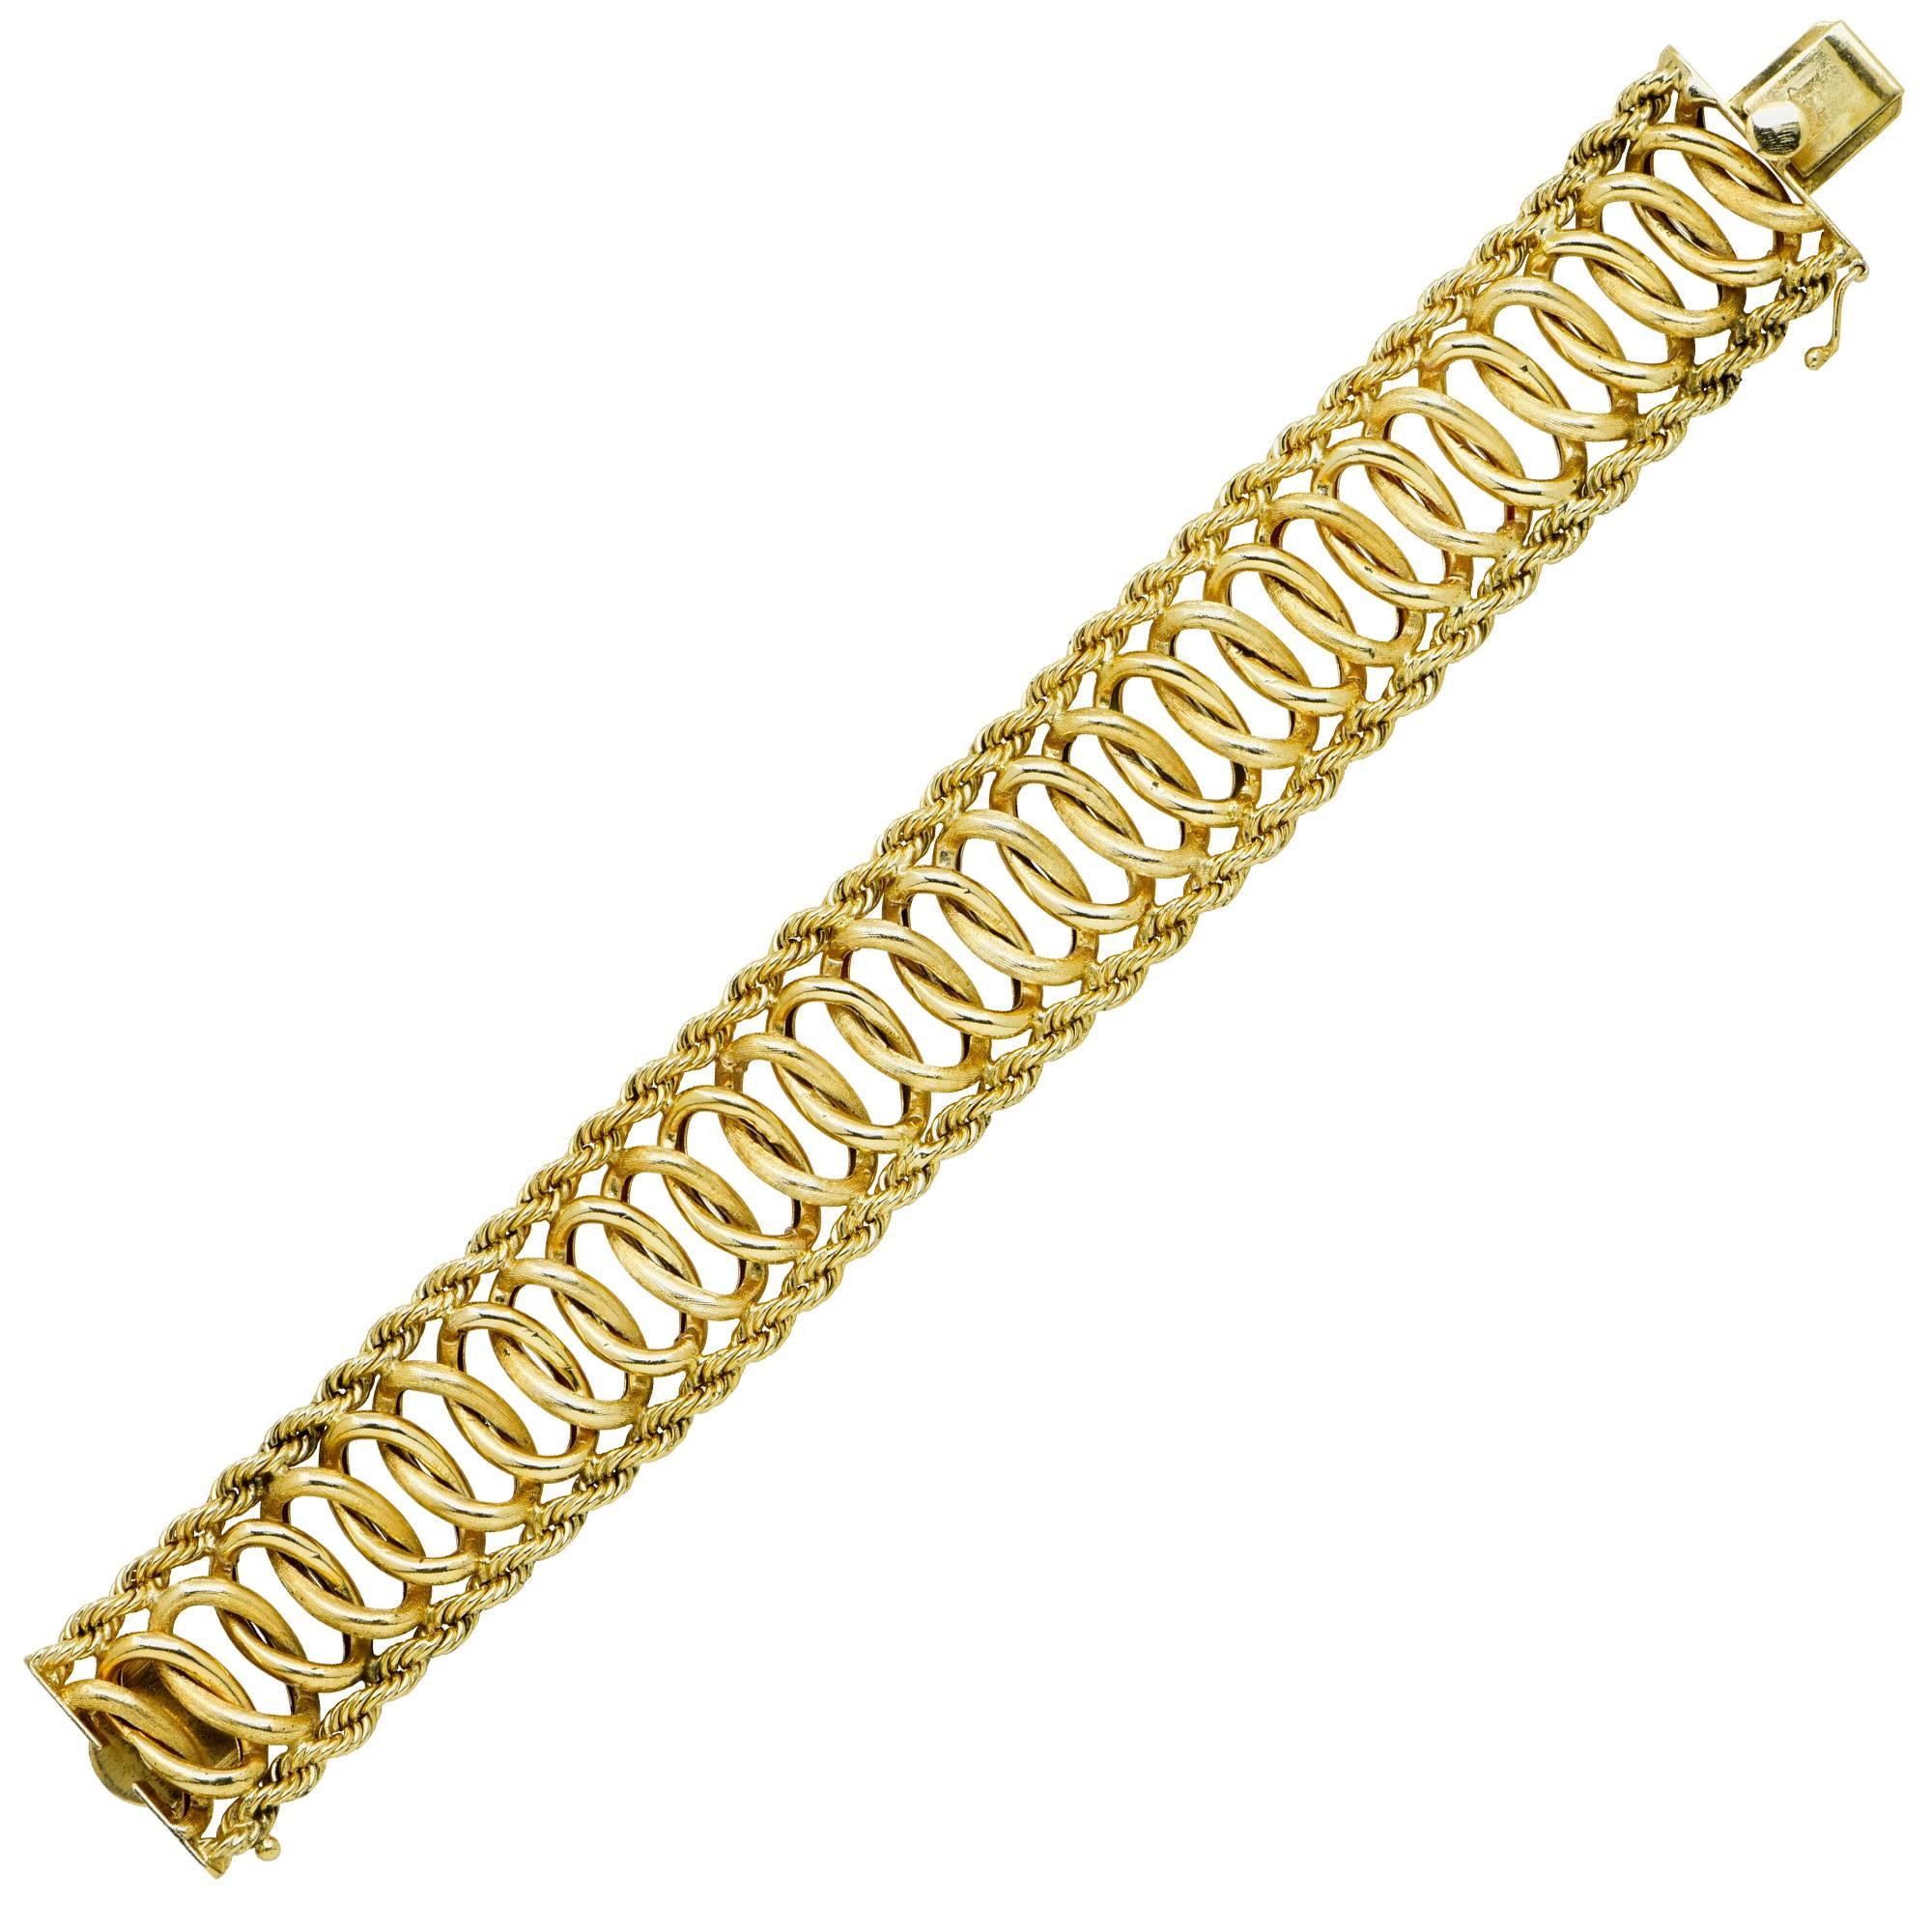 Modern weave and rope bracelet featuring repeating interwoven circles flanked by rope chain in 14Kt yellow gold.

Metal weight: 48.74 grams

This yellow gold bracelet is accompanied by a retail appraisal performed by a GIA Graduate Gemologist.